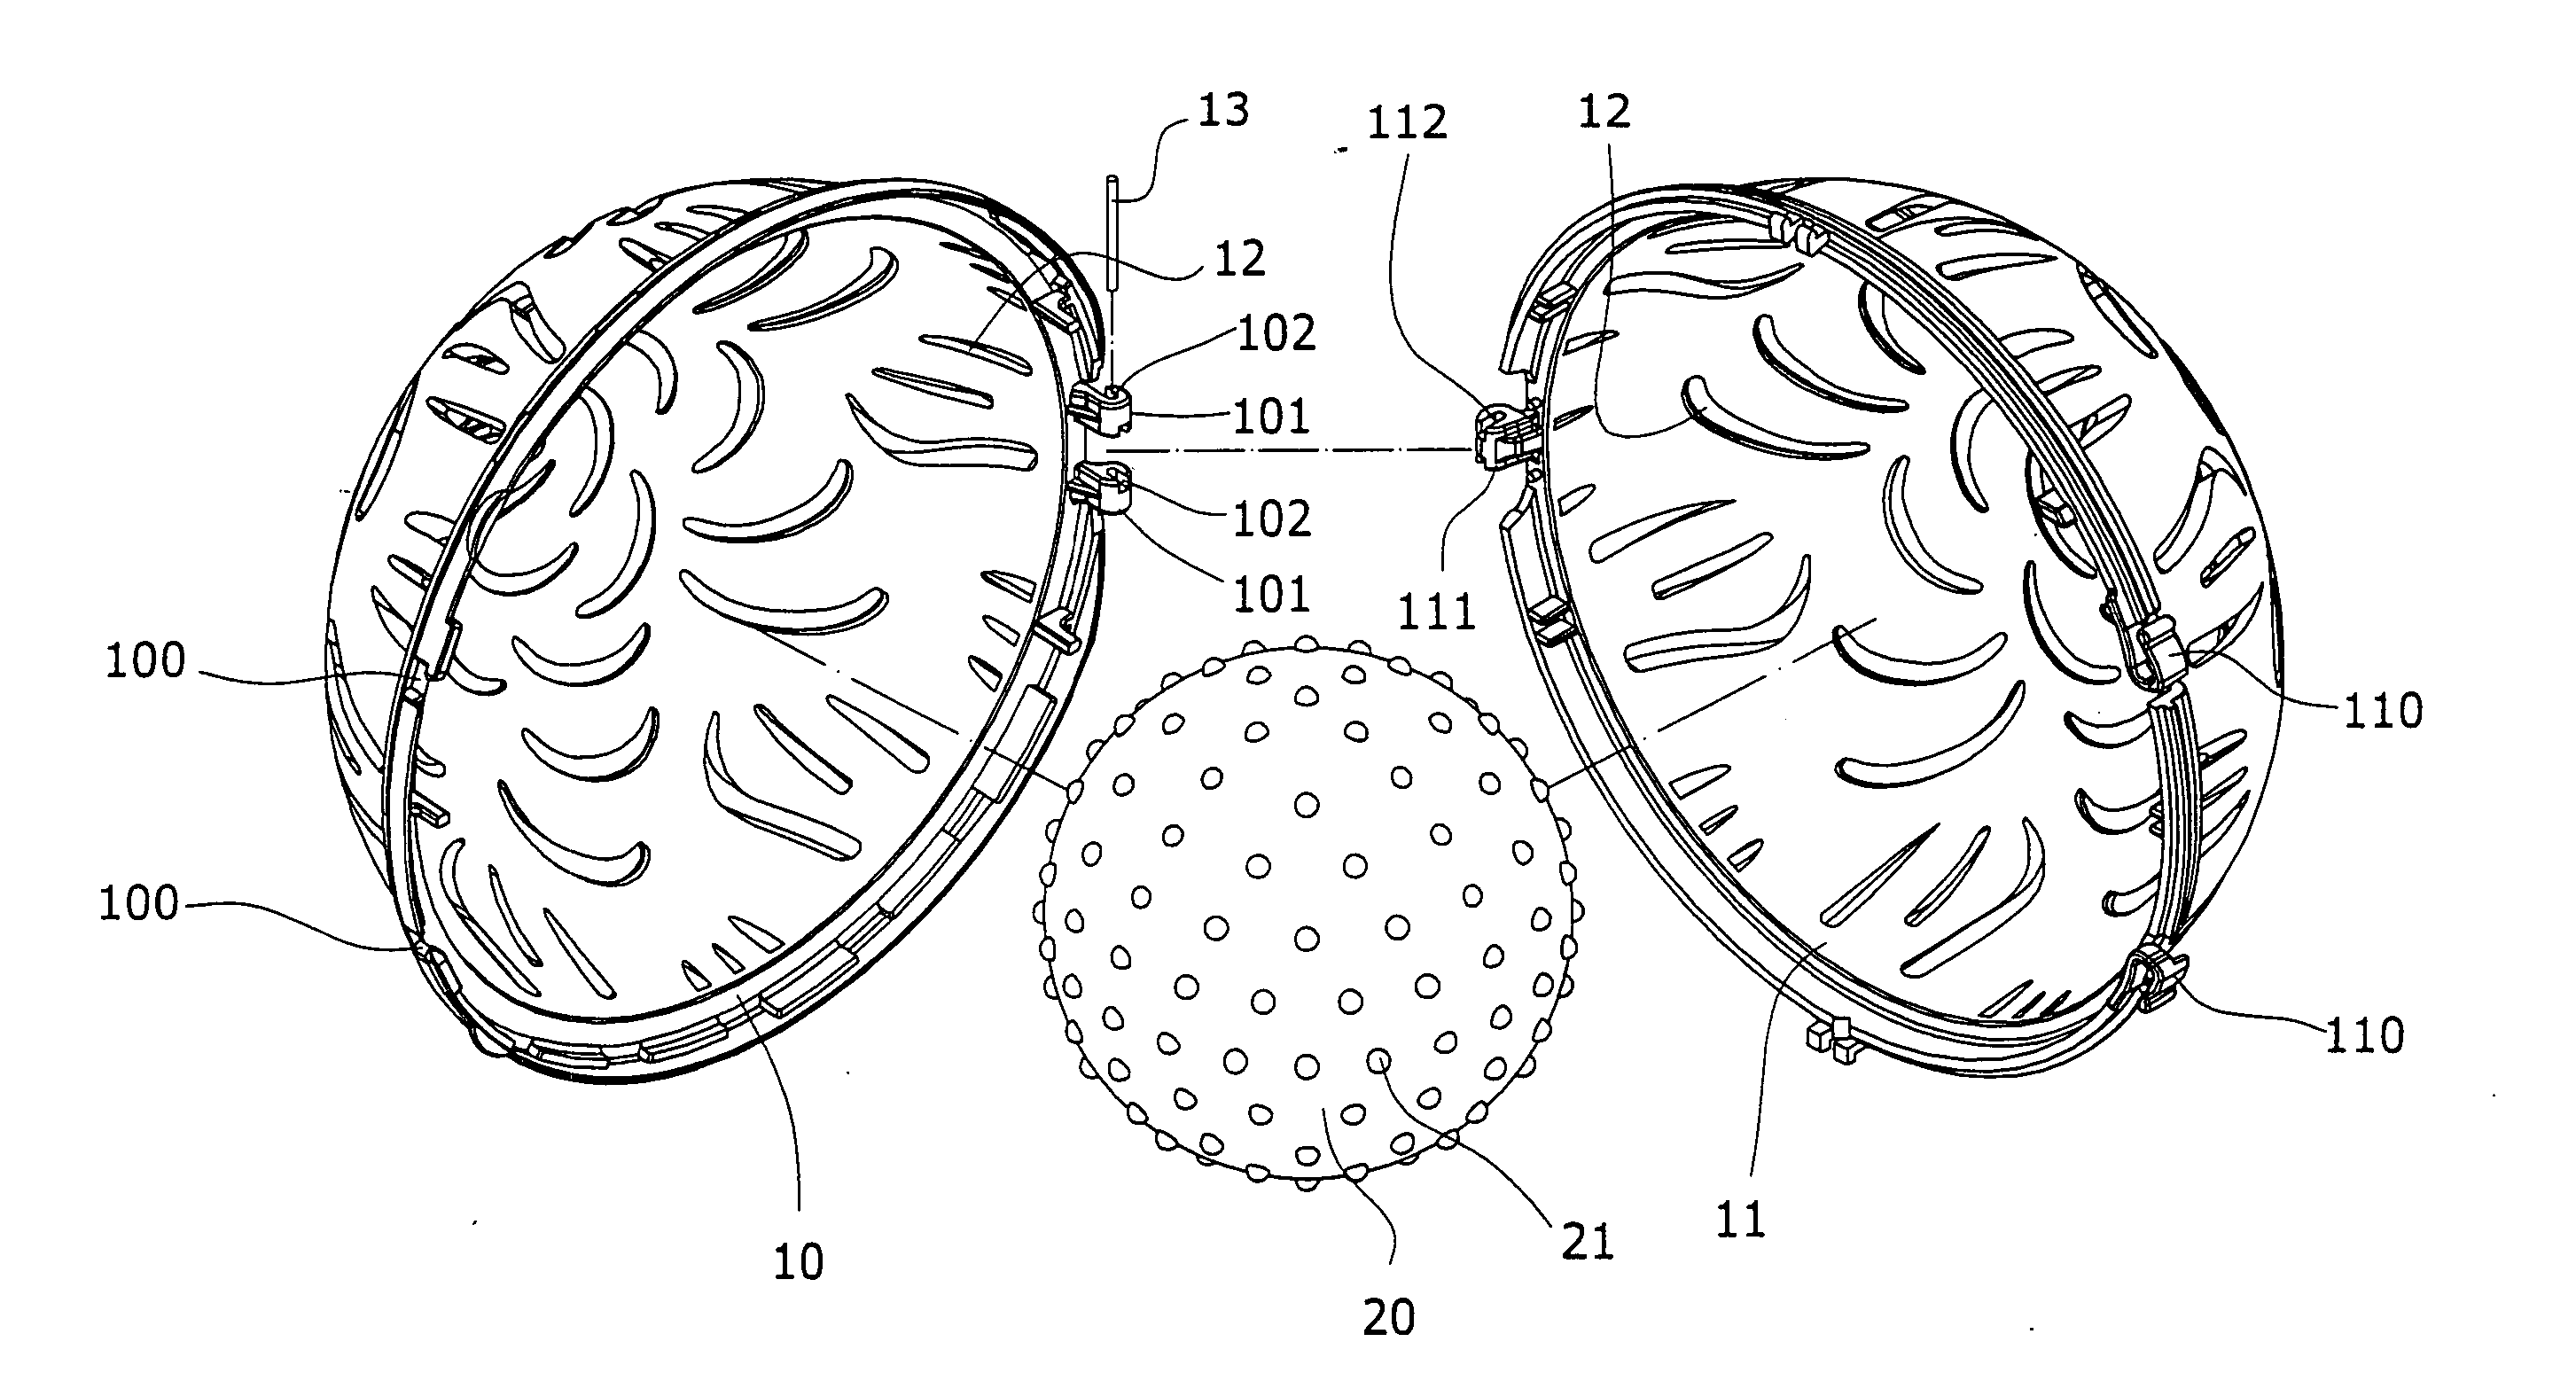 Clothes washing and holding apparatus